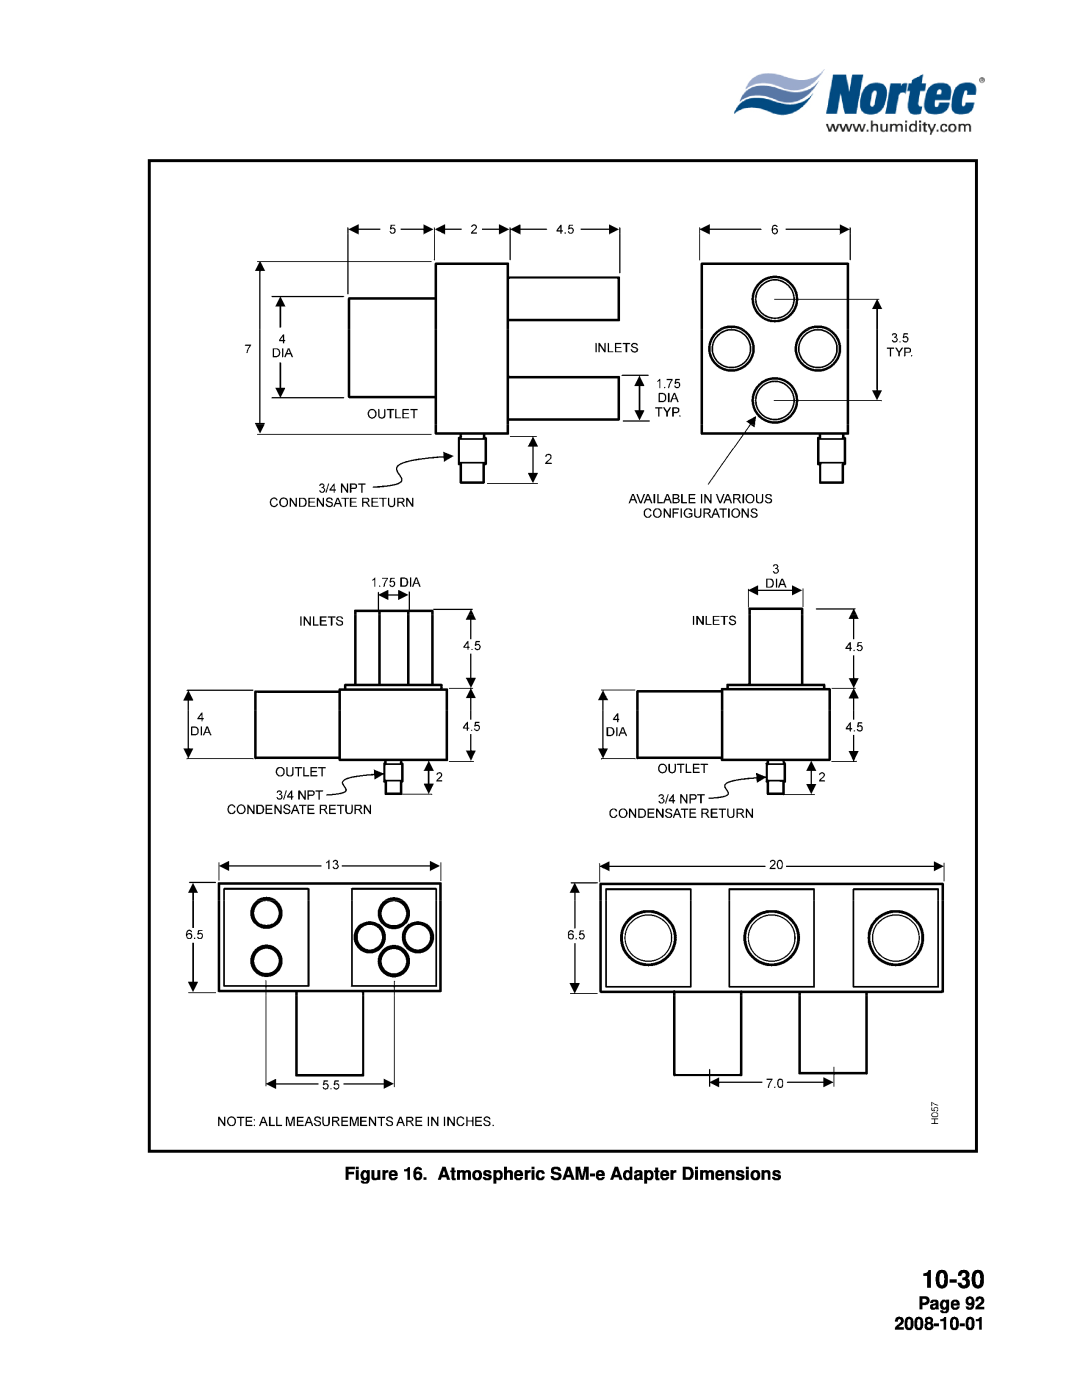 Nortec NHPC, NHTC manual 10-30, Atmospheric SAM-eAdapter Dimensions, Page 92 